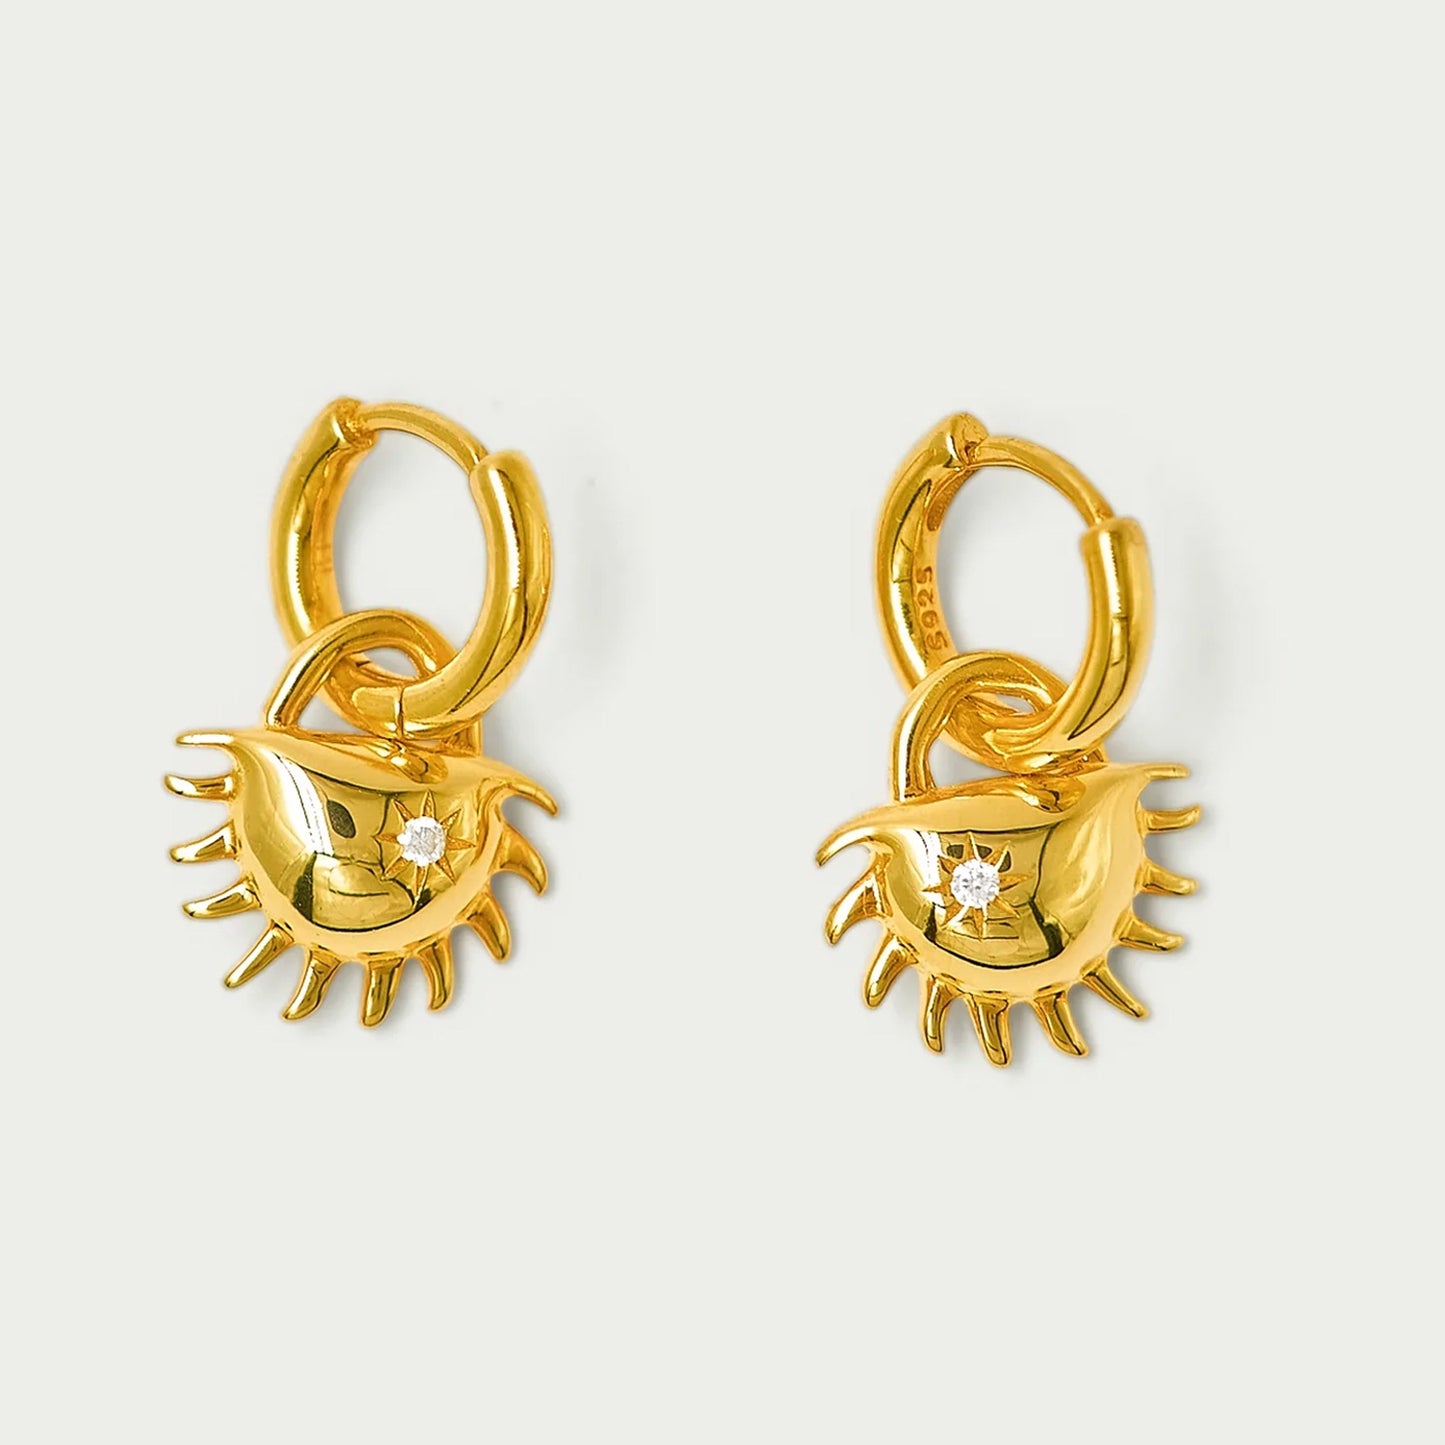 Brie Leon - Solida Charm Earrings - Gold/Clear